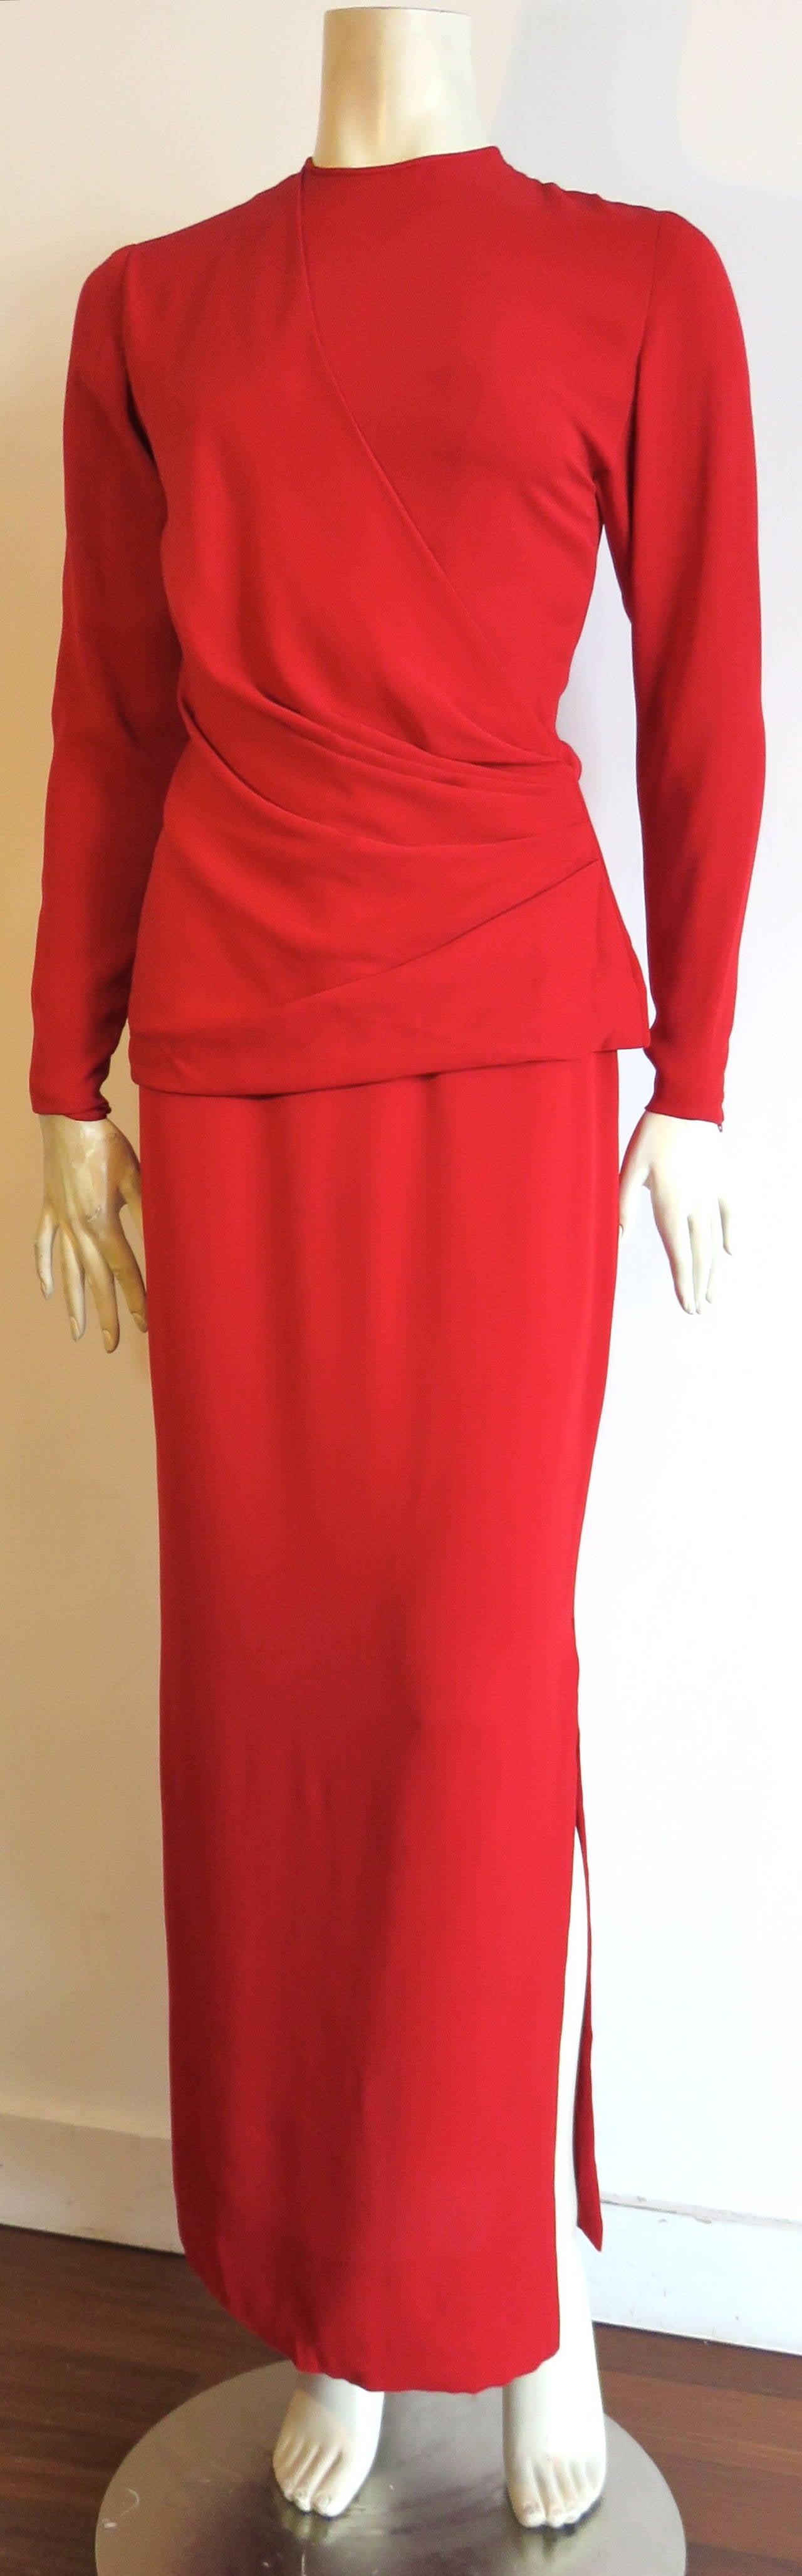 Gorgeous, 1980's GALANOS Red silk crepe 2pc. skirt and tunic top set.

This fabulous set features a long sleeve, draped tunic top with a 'wrap look' style front construction.  The pleated details at the wearer's lower left side seam are stitched